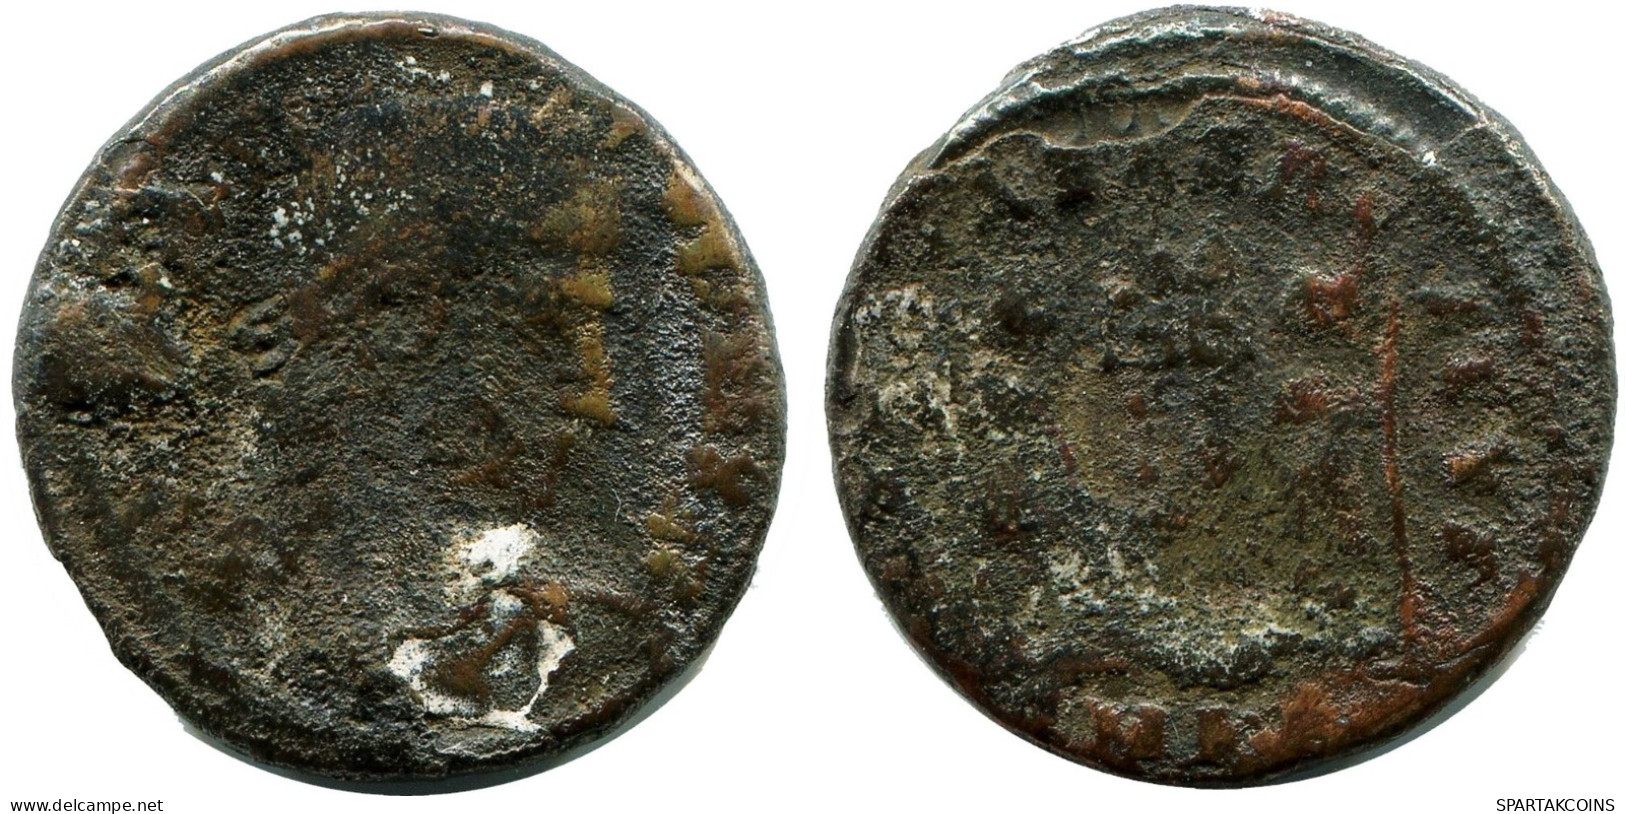 CONSTANTINE I MINTED IN CYZICUS FOUND IN IHNASYAH HOARD EGYPT #ANC10981.14.U.A - El Imperio Christiano (307 / 363)